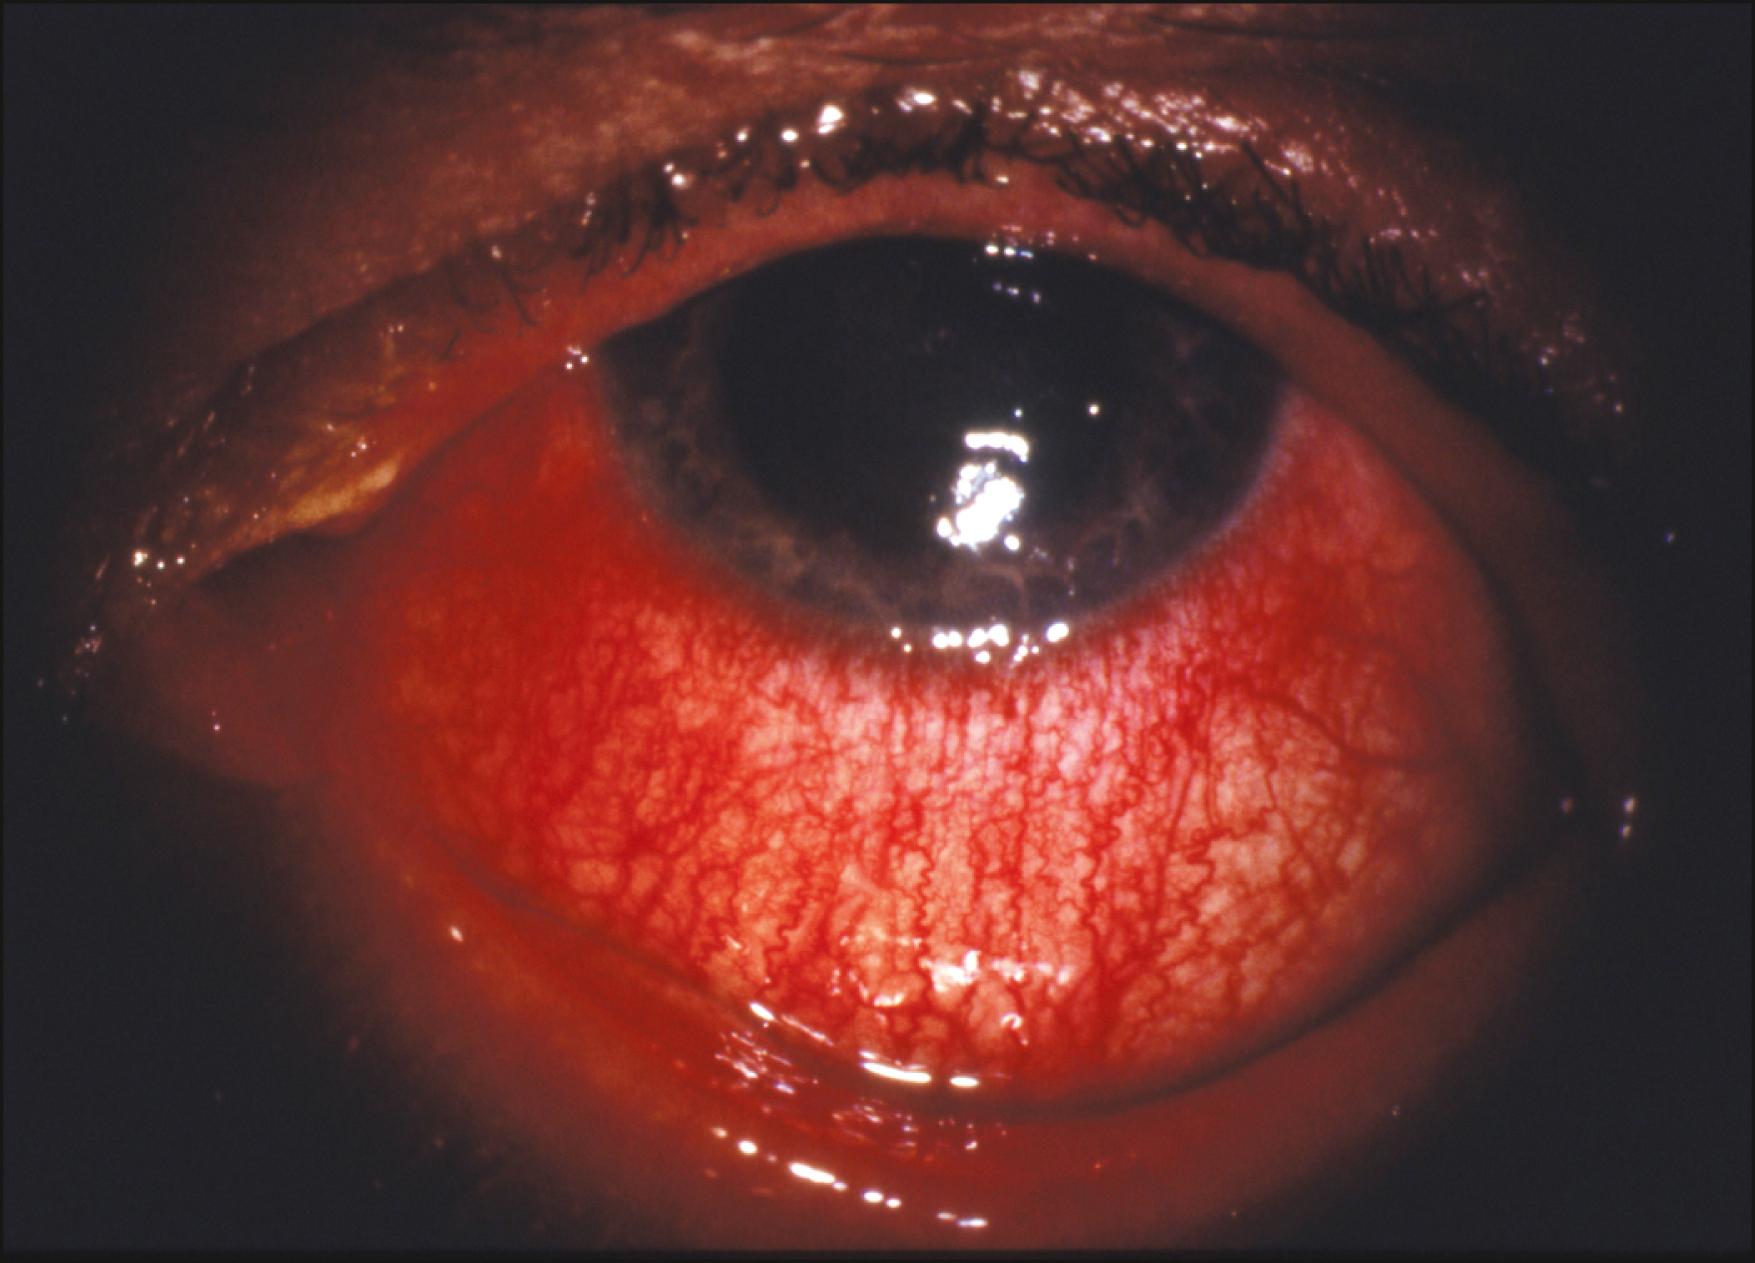 Fig. 47.3, Toxic keratoconjunctivitis secondary to topical trifluorothymidine (Viroptic). Once again, seen here is the characteristic corneal epithelial irregularity and conjunctival injection more prominent in the inferior aspect of the eye.